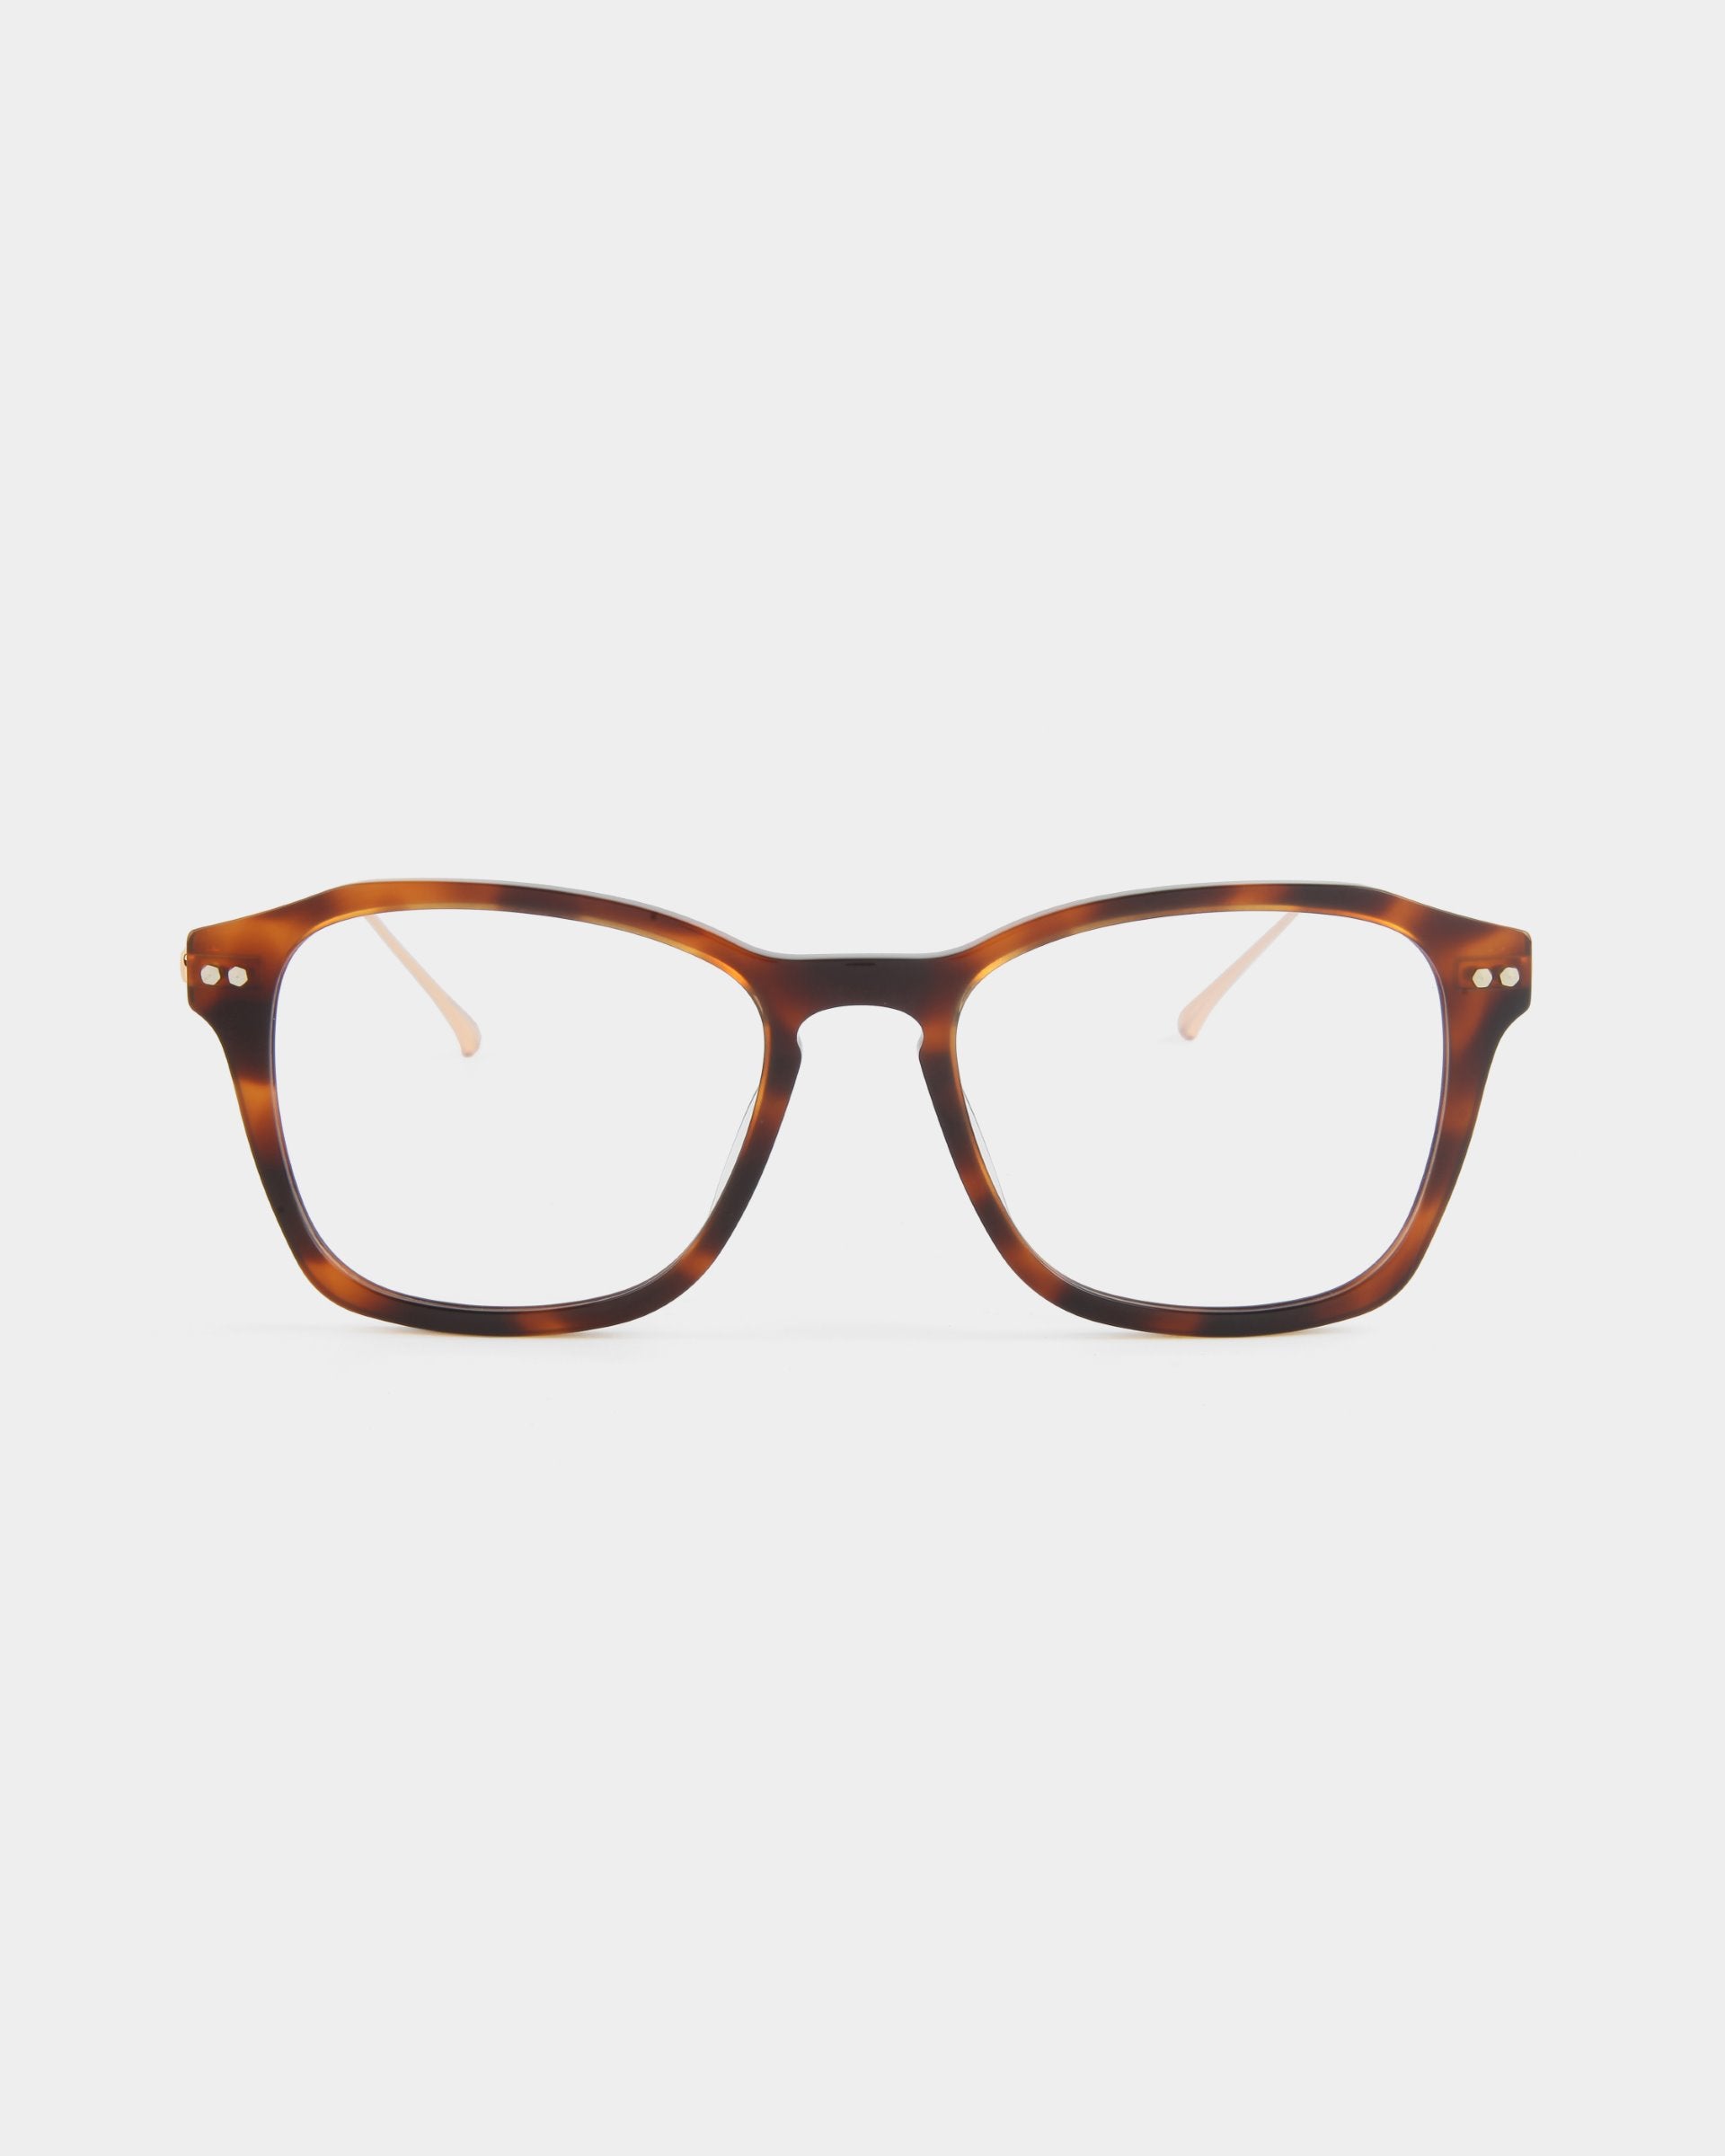 A pair of rectangular, brown tortoiseshell eyeglasses with clear lenses is centered against a plain white background. The frames have small silver embellishments near the hinges on the front and feature adjustable nose pads for comfort. These stylish Morris glasses by For Art&#39;s Sake® are perfect for those seeking prescription service.